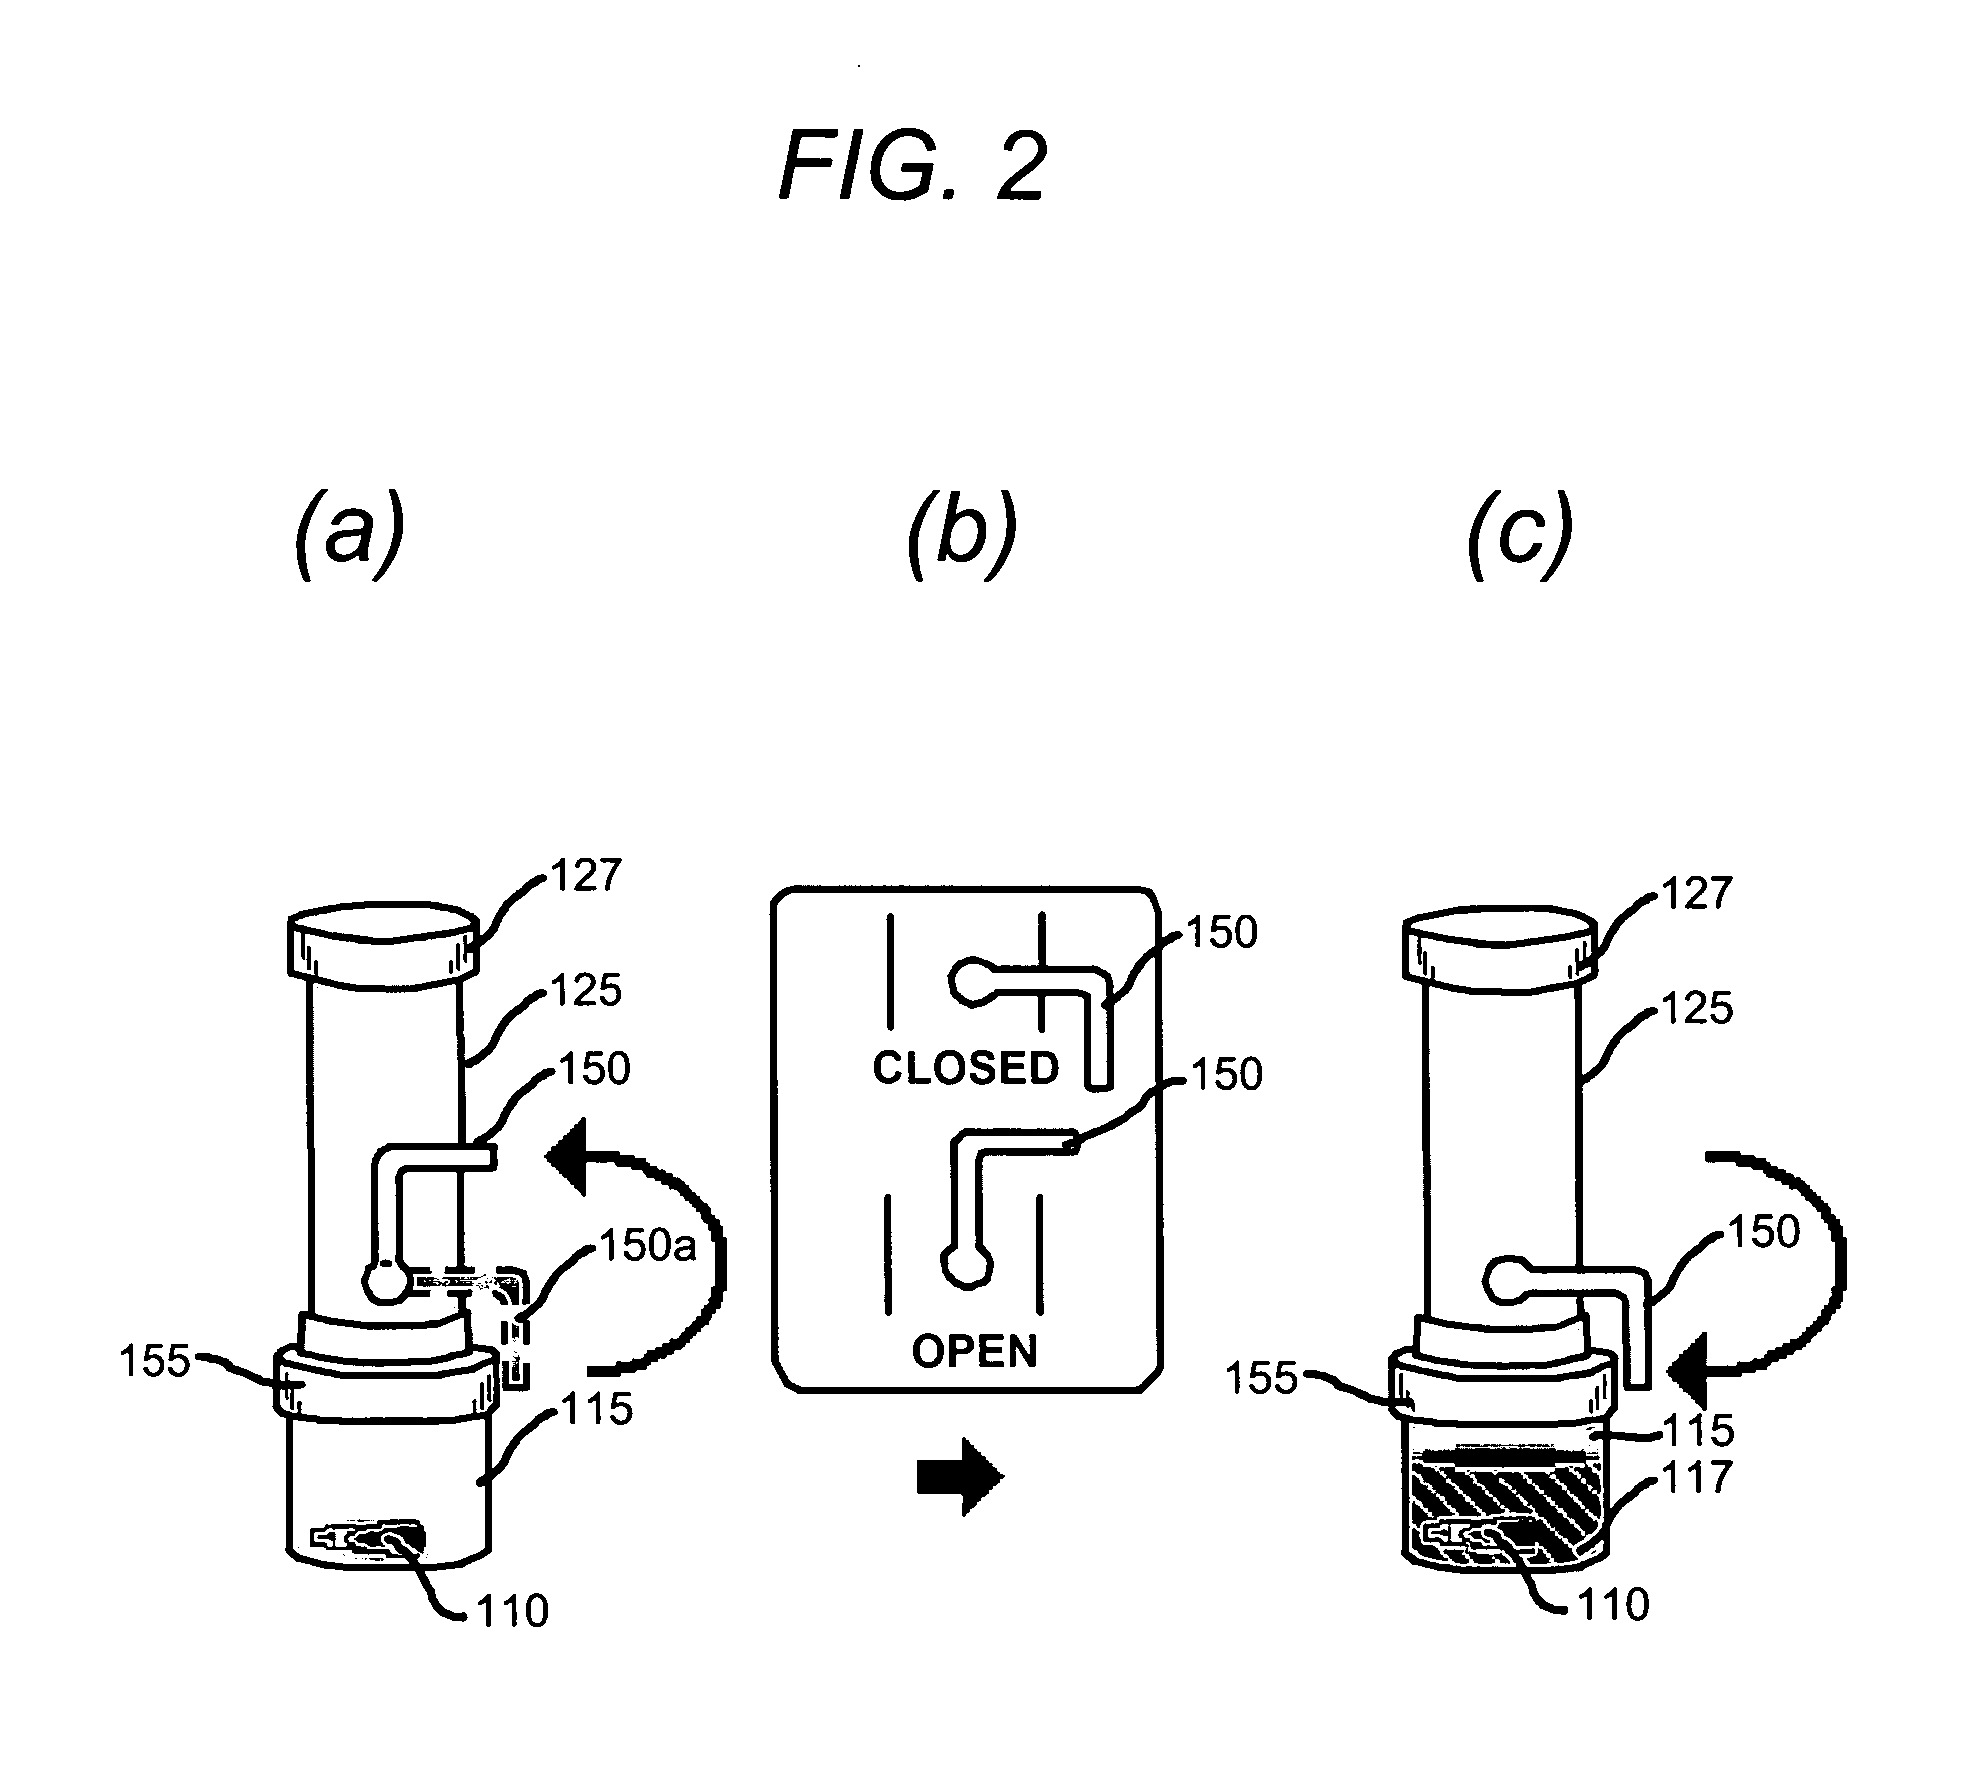 Device for collection and preservation of tissue or stool samples